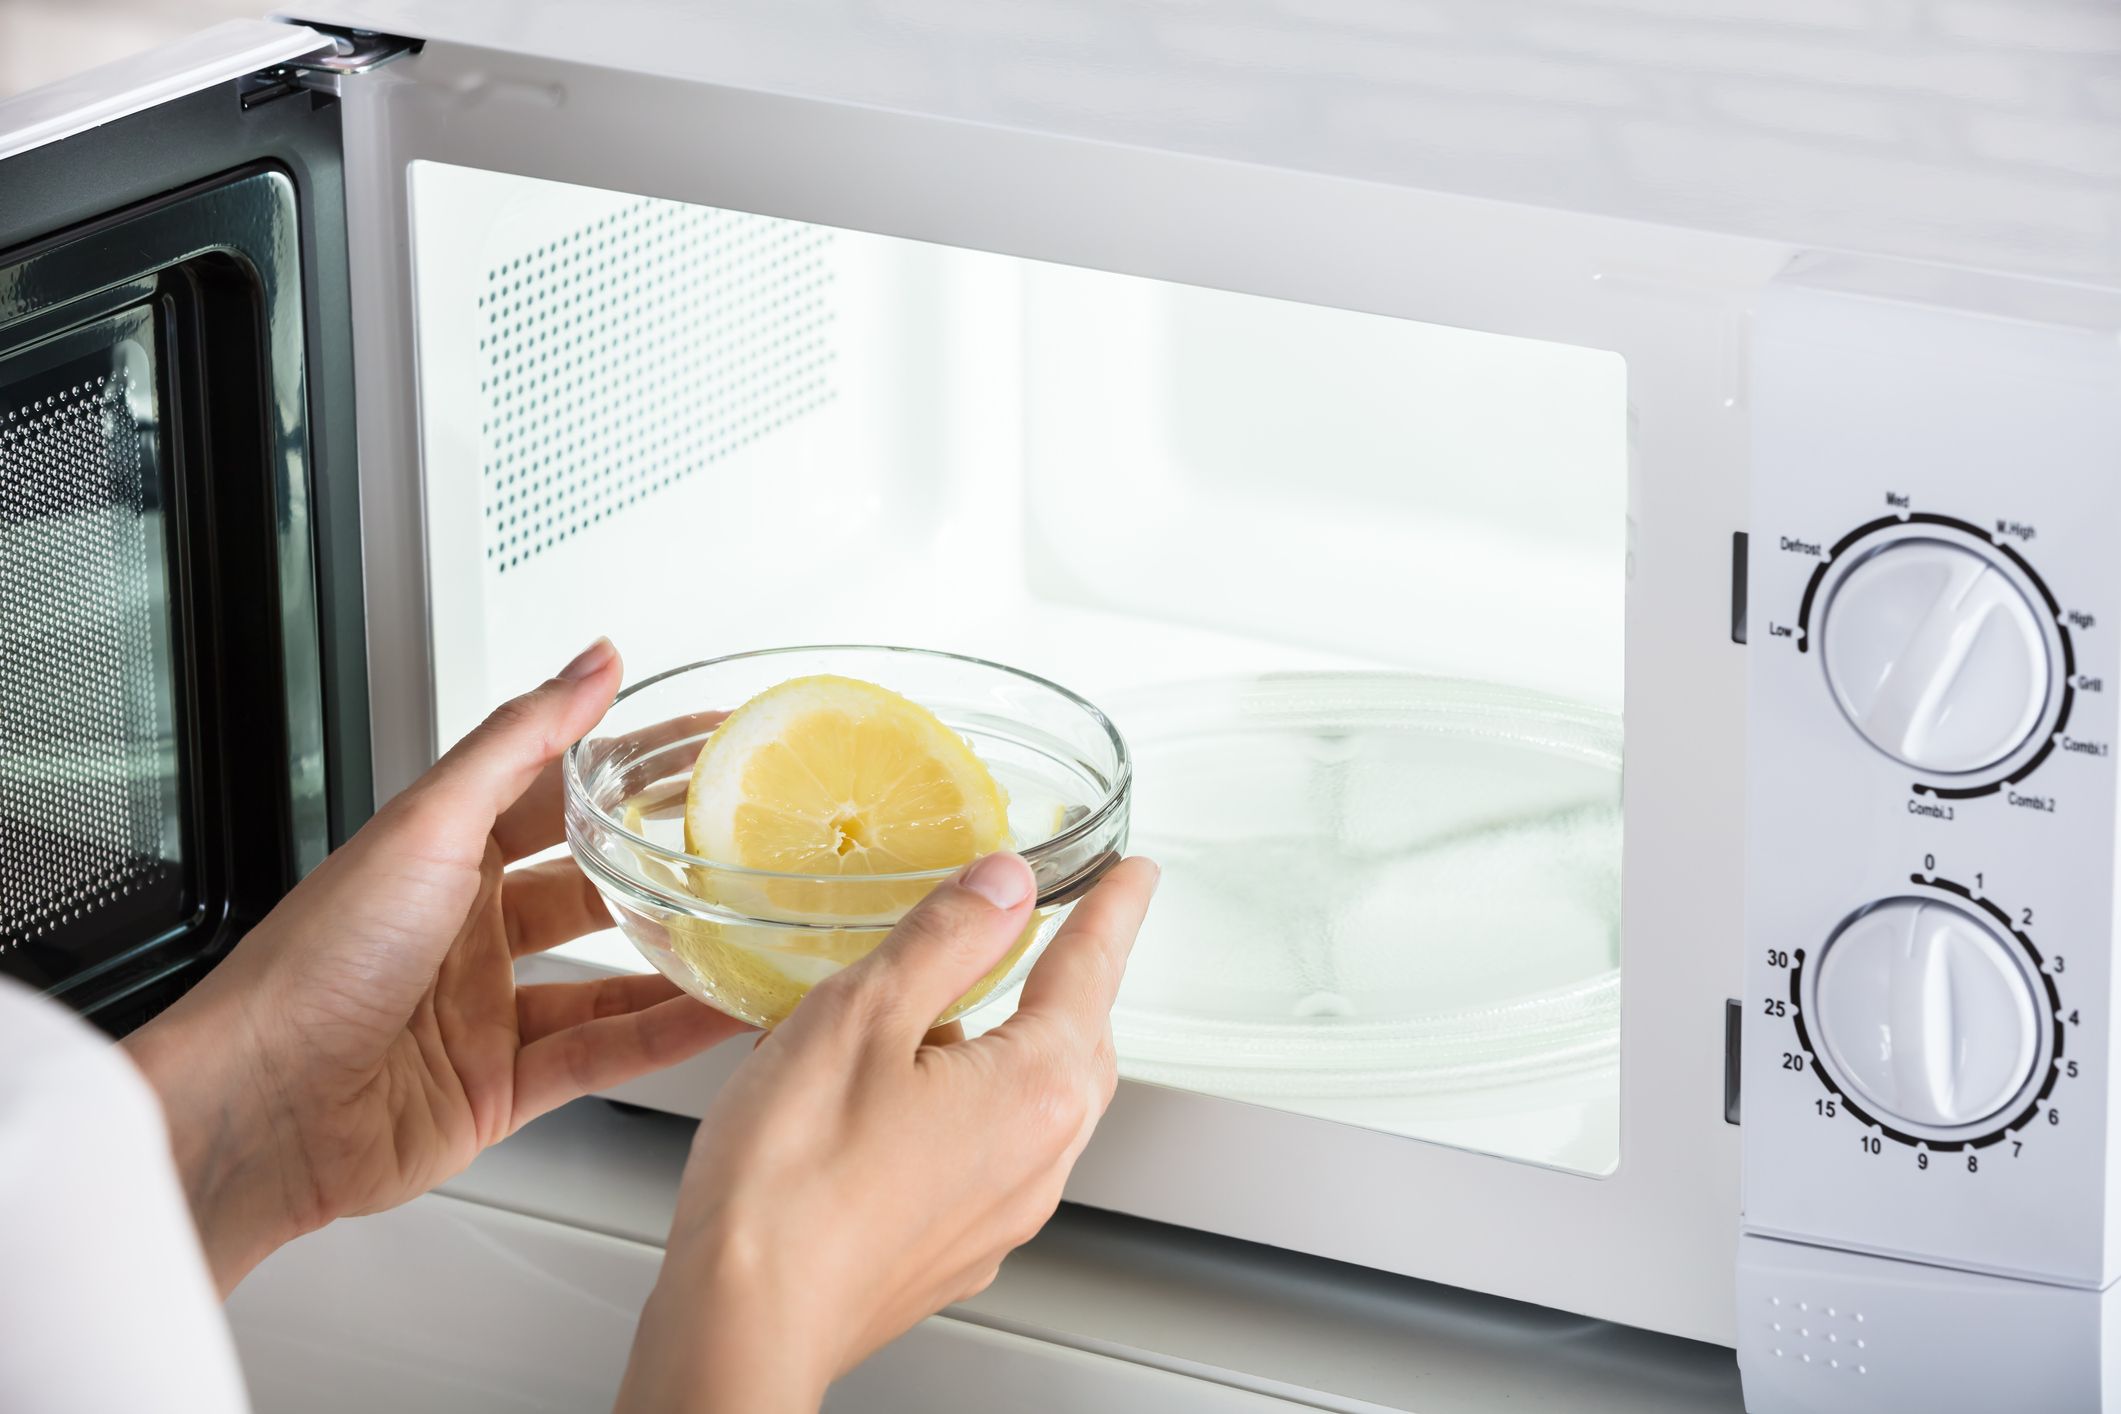 https://hips.hearstapps.com/hmg-prod/images/how-to-clean-a-microwave-1583162534.jpg